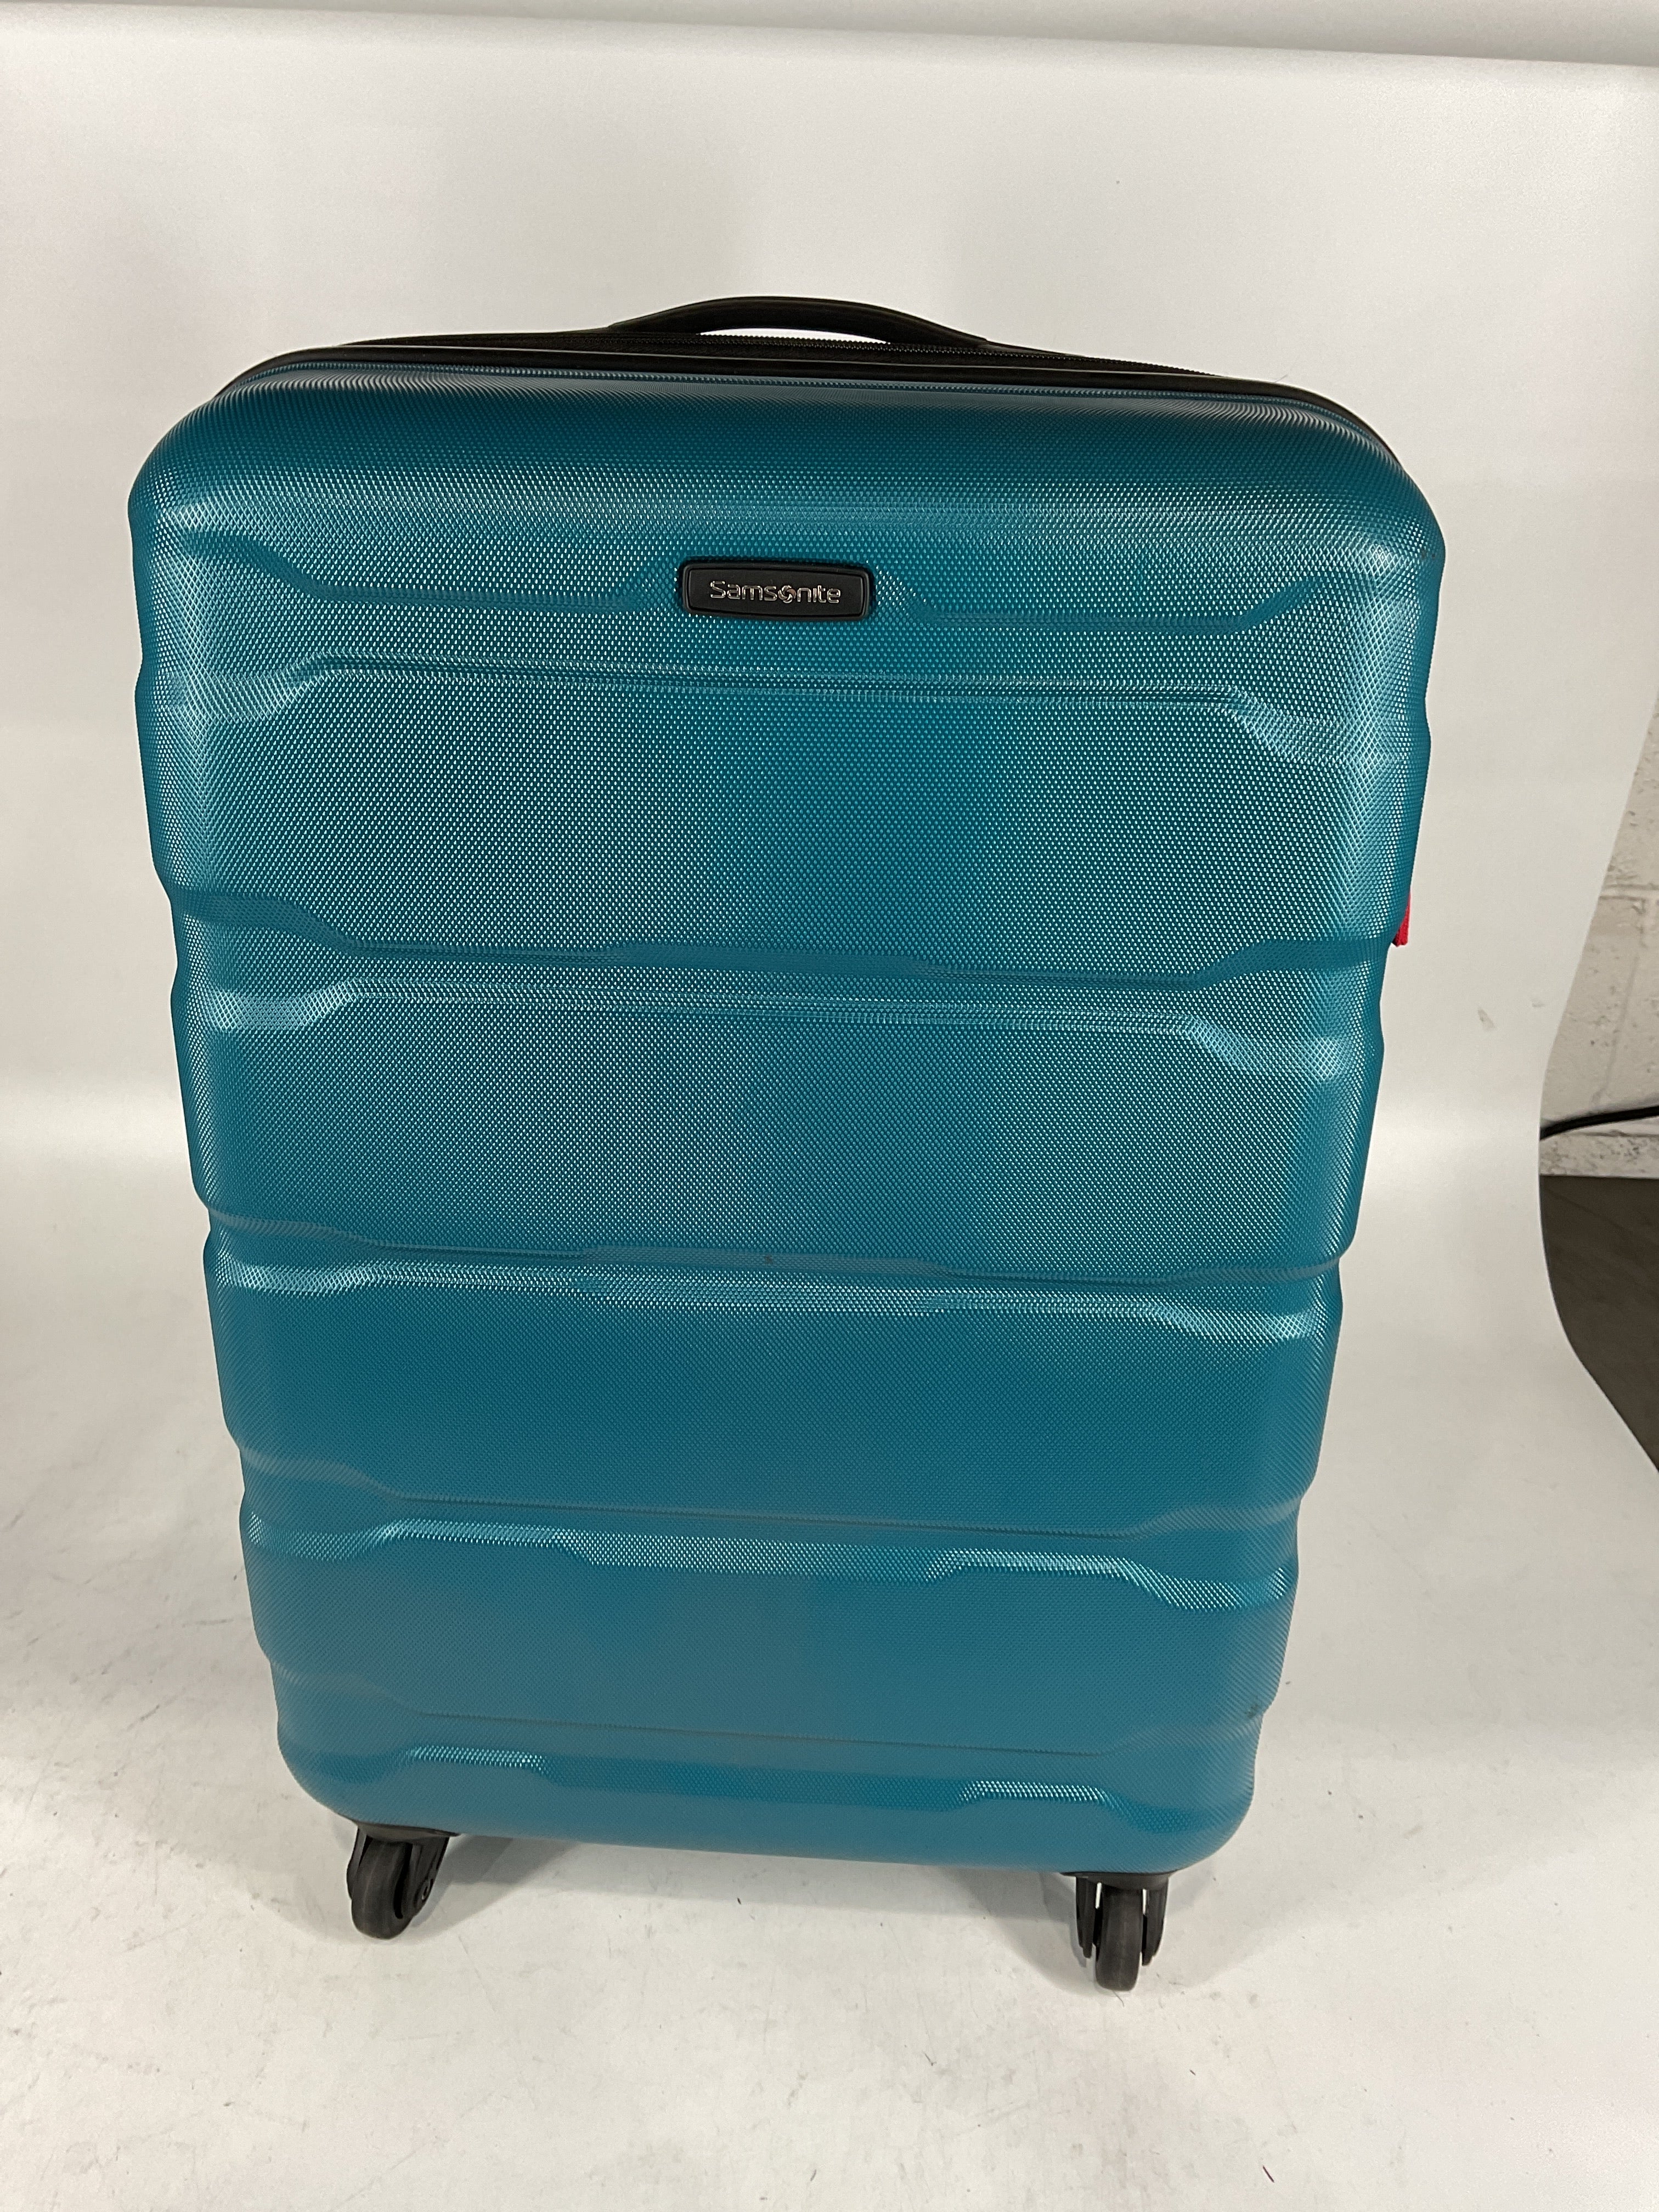 Samsonite Omni Pc Hardside Expandable Luggage with Spinner Wheels - Caribbean Blue/Checked-Medium 24-Inch